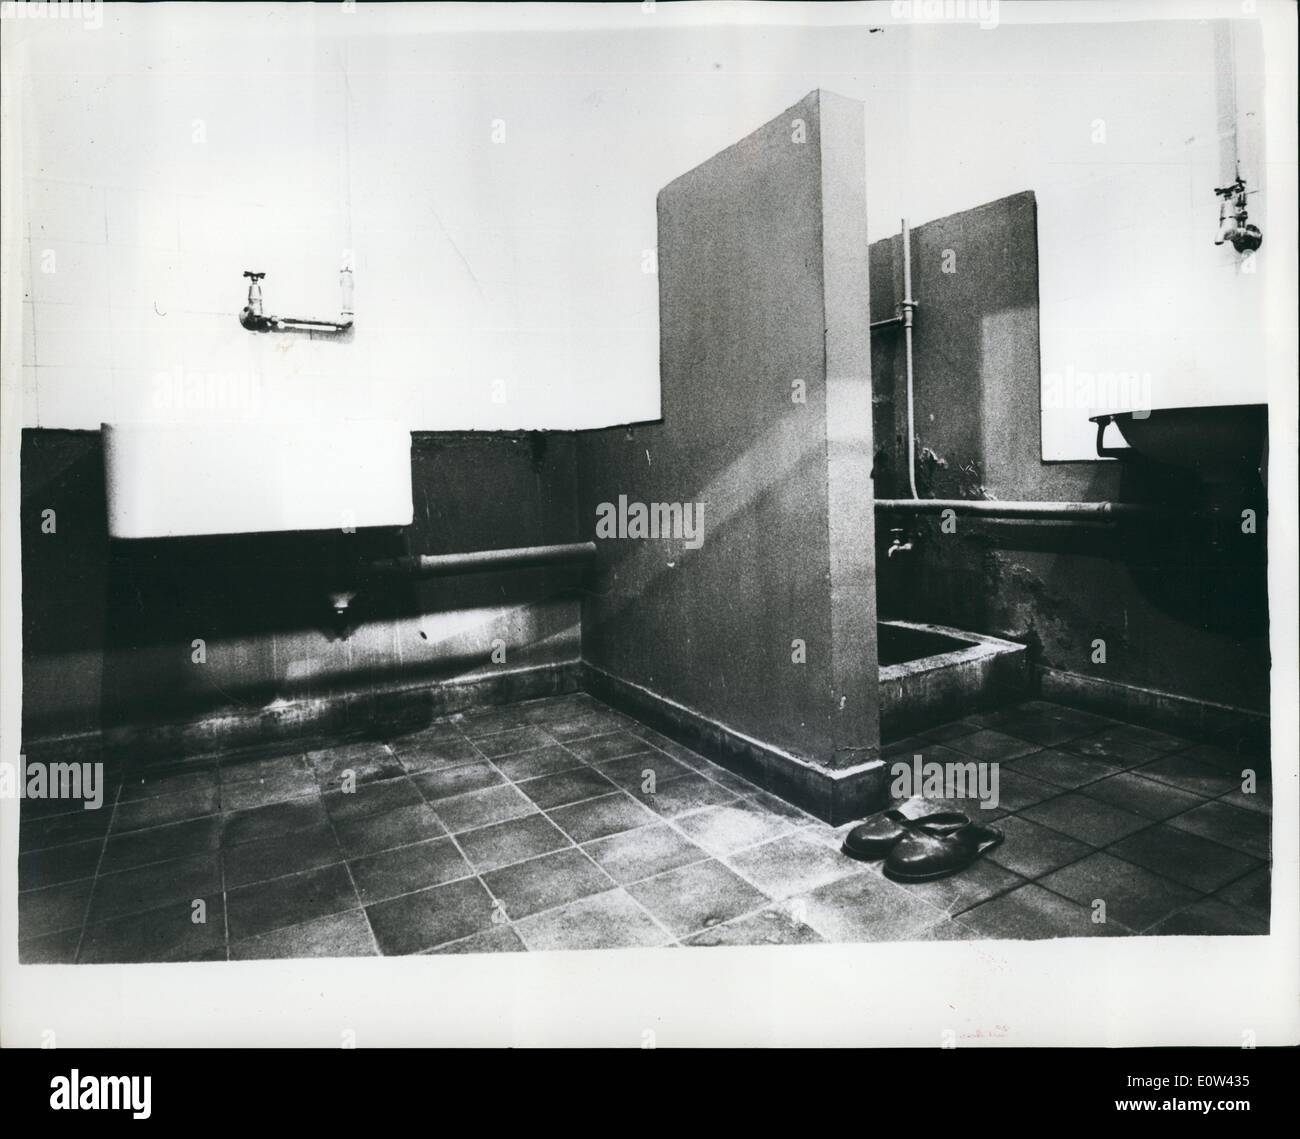 Apr. 04, 1961 - Preparing for the trial Adolf Eichmann. He is accused of Mass Murder of Jews - In Germany.: The trial opens in Jerusalem tomorrow of the massmurder of millions of Jews - in Nazi wartime concentration camps. Photo shows A corner of Eichmann's strongly guarded prison cell - with private ''bathroom'' facilities - in his secret detention centre. Trial opens in Jerusalem tomorrow. Stock Photo